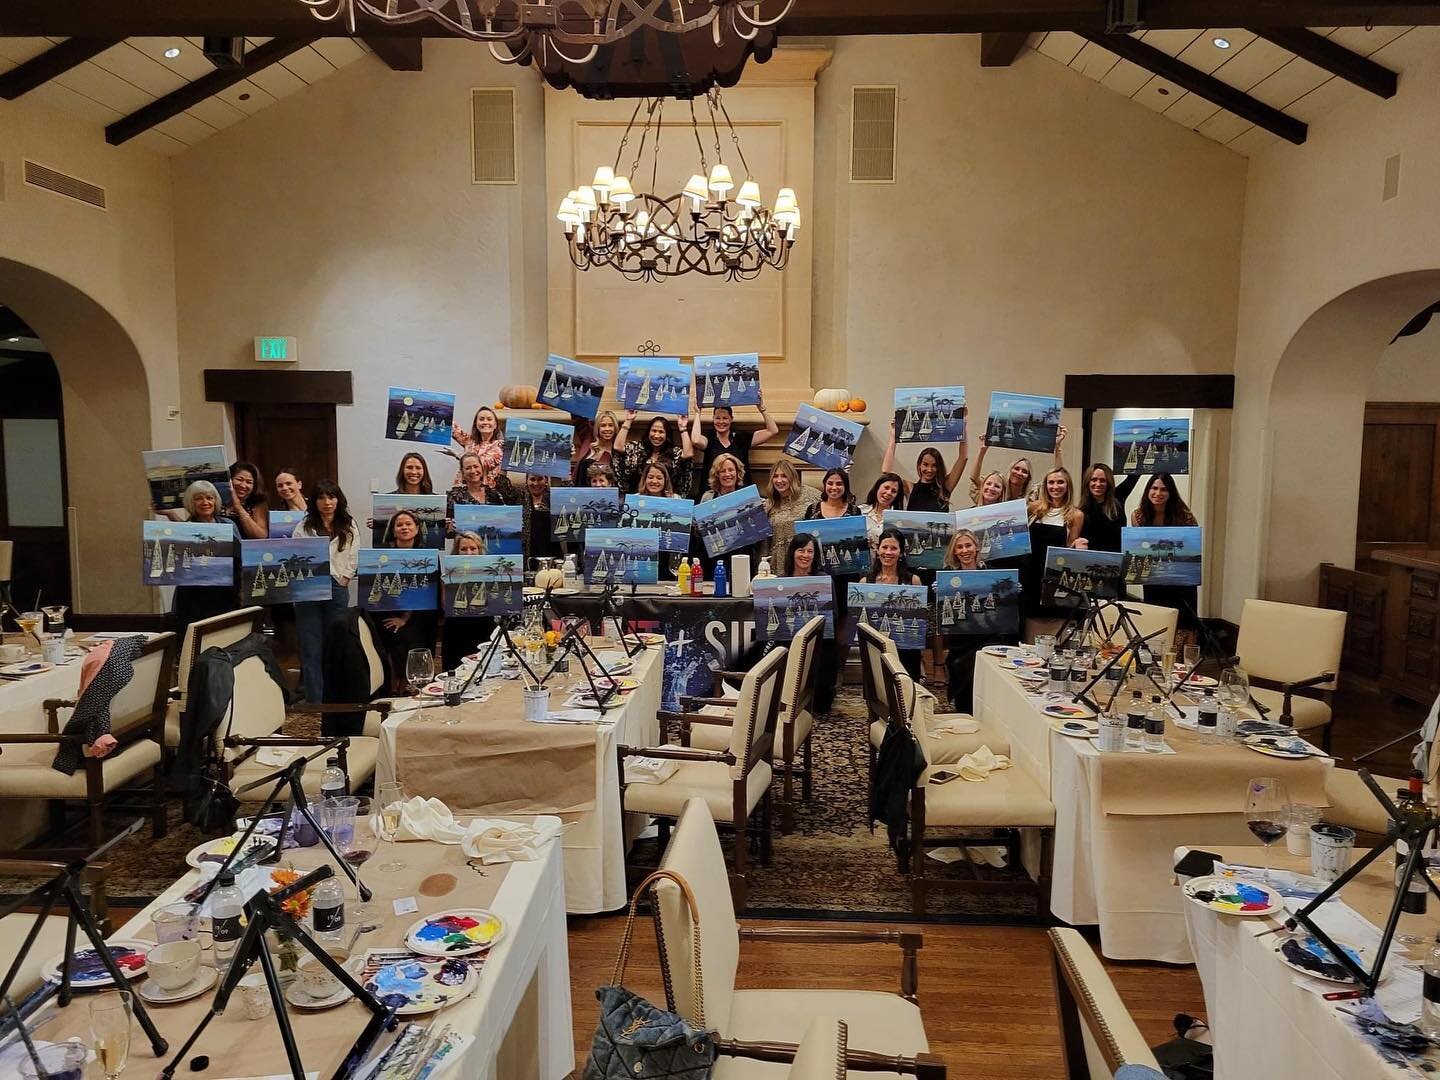 A wine, paint, and tapas night for the ladies at the Virginia Country Club in Long Beach! What a beautiful place, thank you for having us! We had so much fun painting the Naples Canal Holiday Lights with all of you! #bestofla #bestoflosangeles #brush